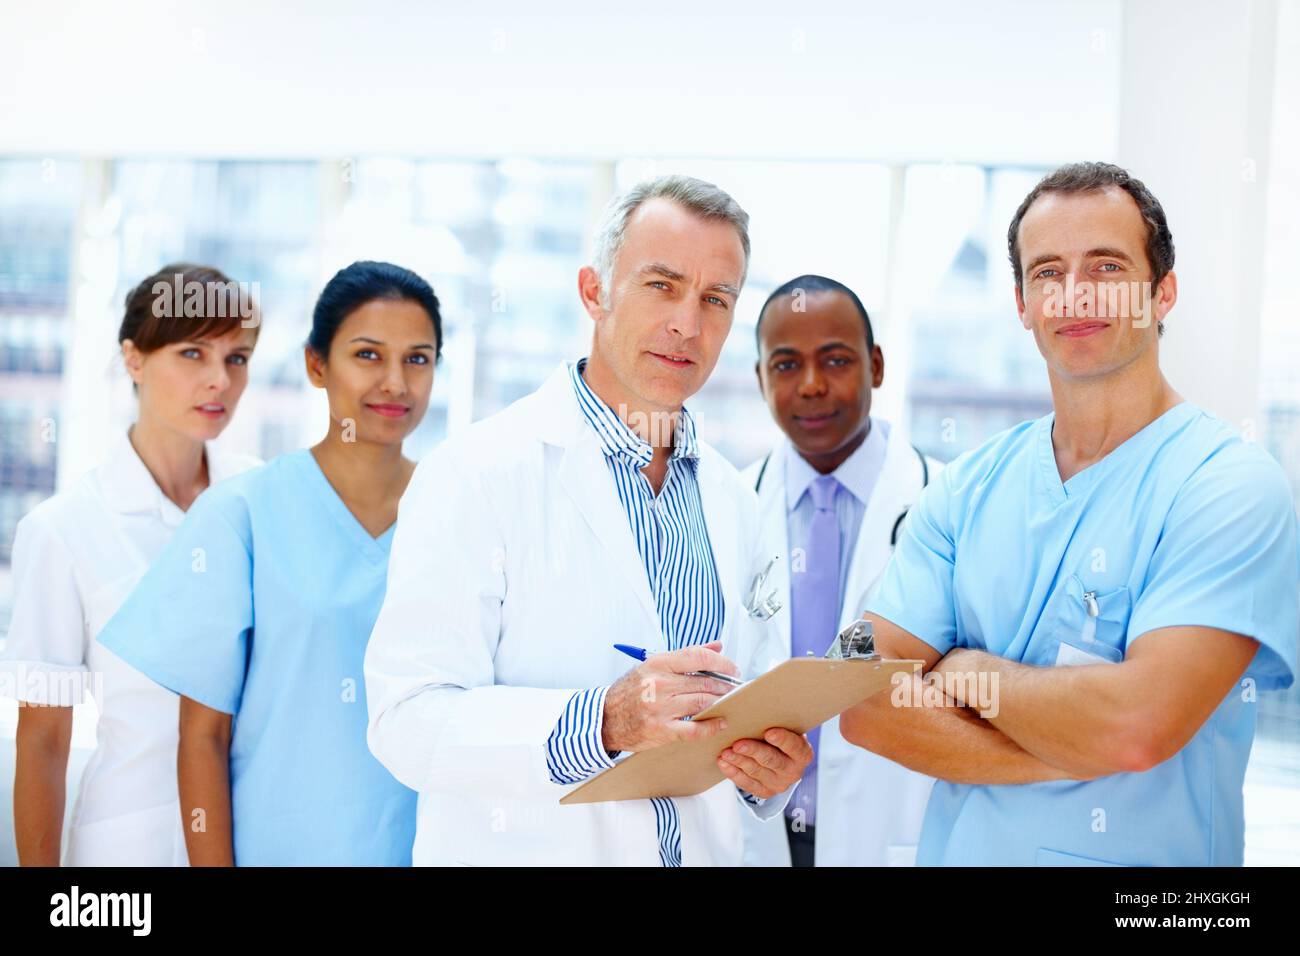 Group of healthcare professionals. Diverse team of healthcare professionals looking serious. Stock Photo